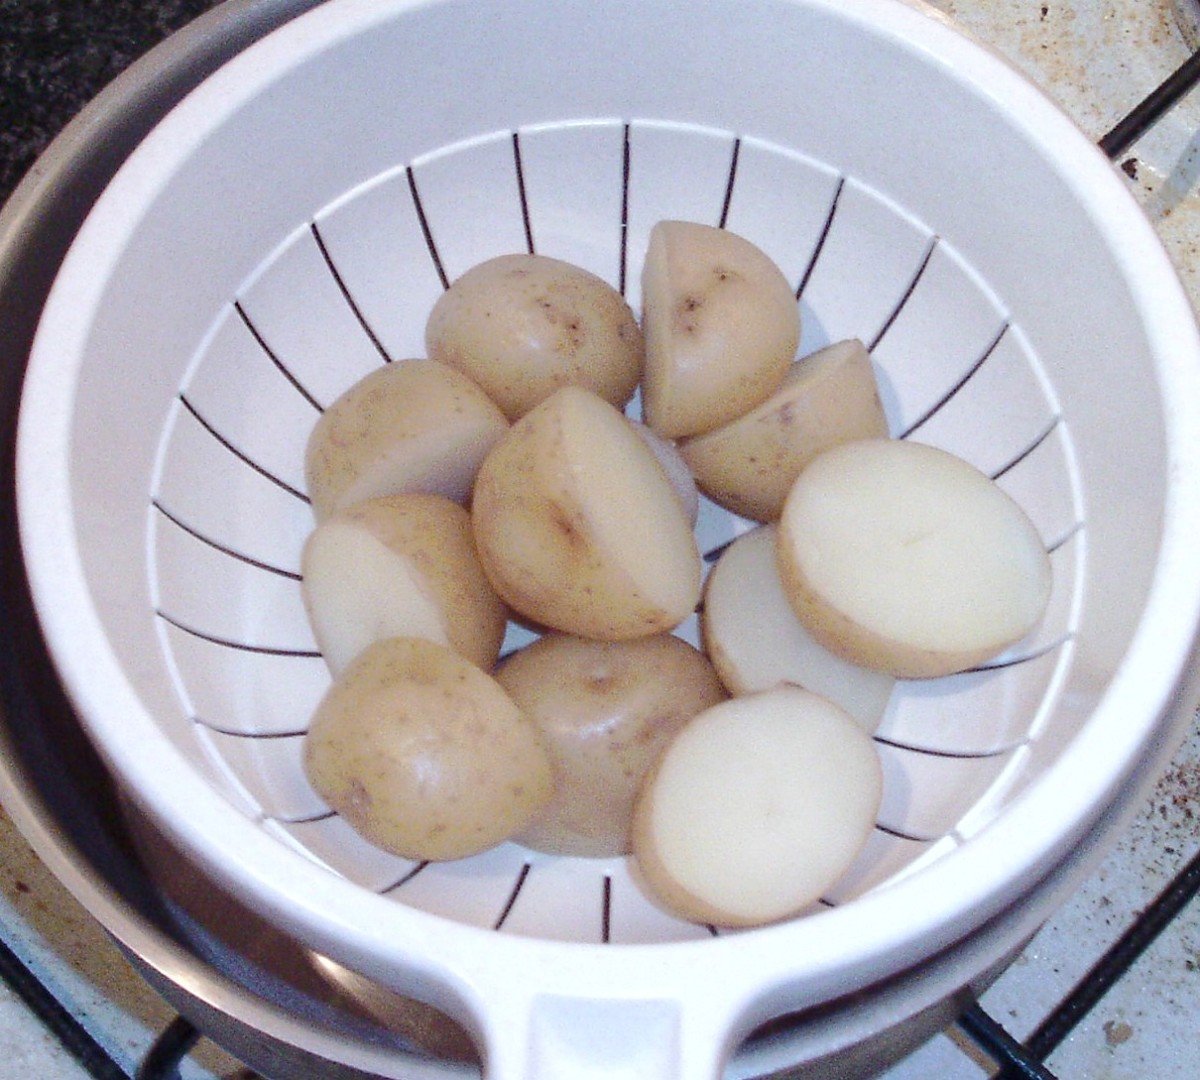 Boiled and drained potato halves